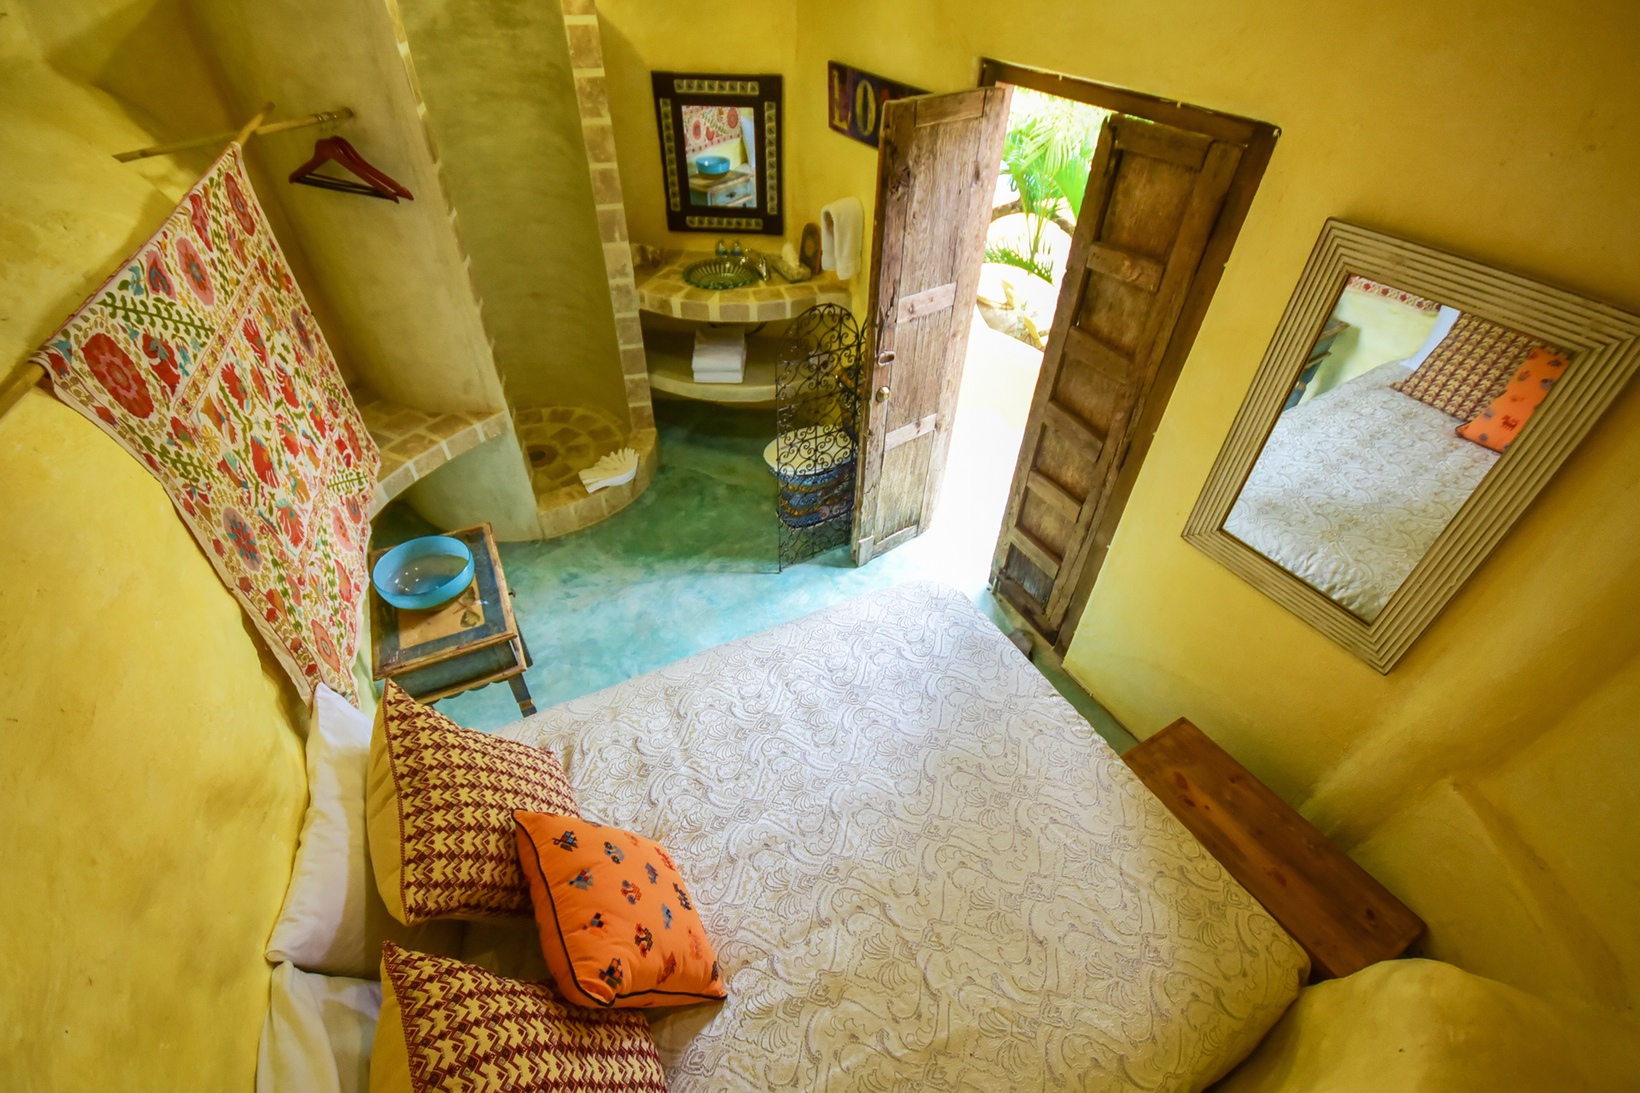 El Estudio at Amor Boutique Hotel is an affordable and charming one bedroom in Sayulita Mexico.